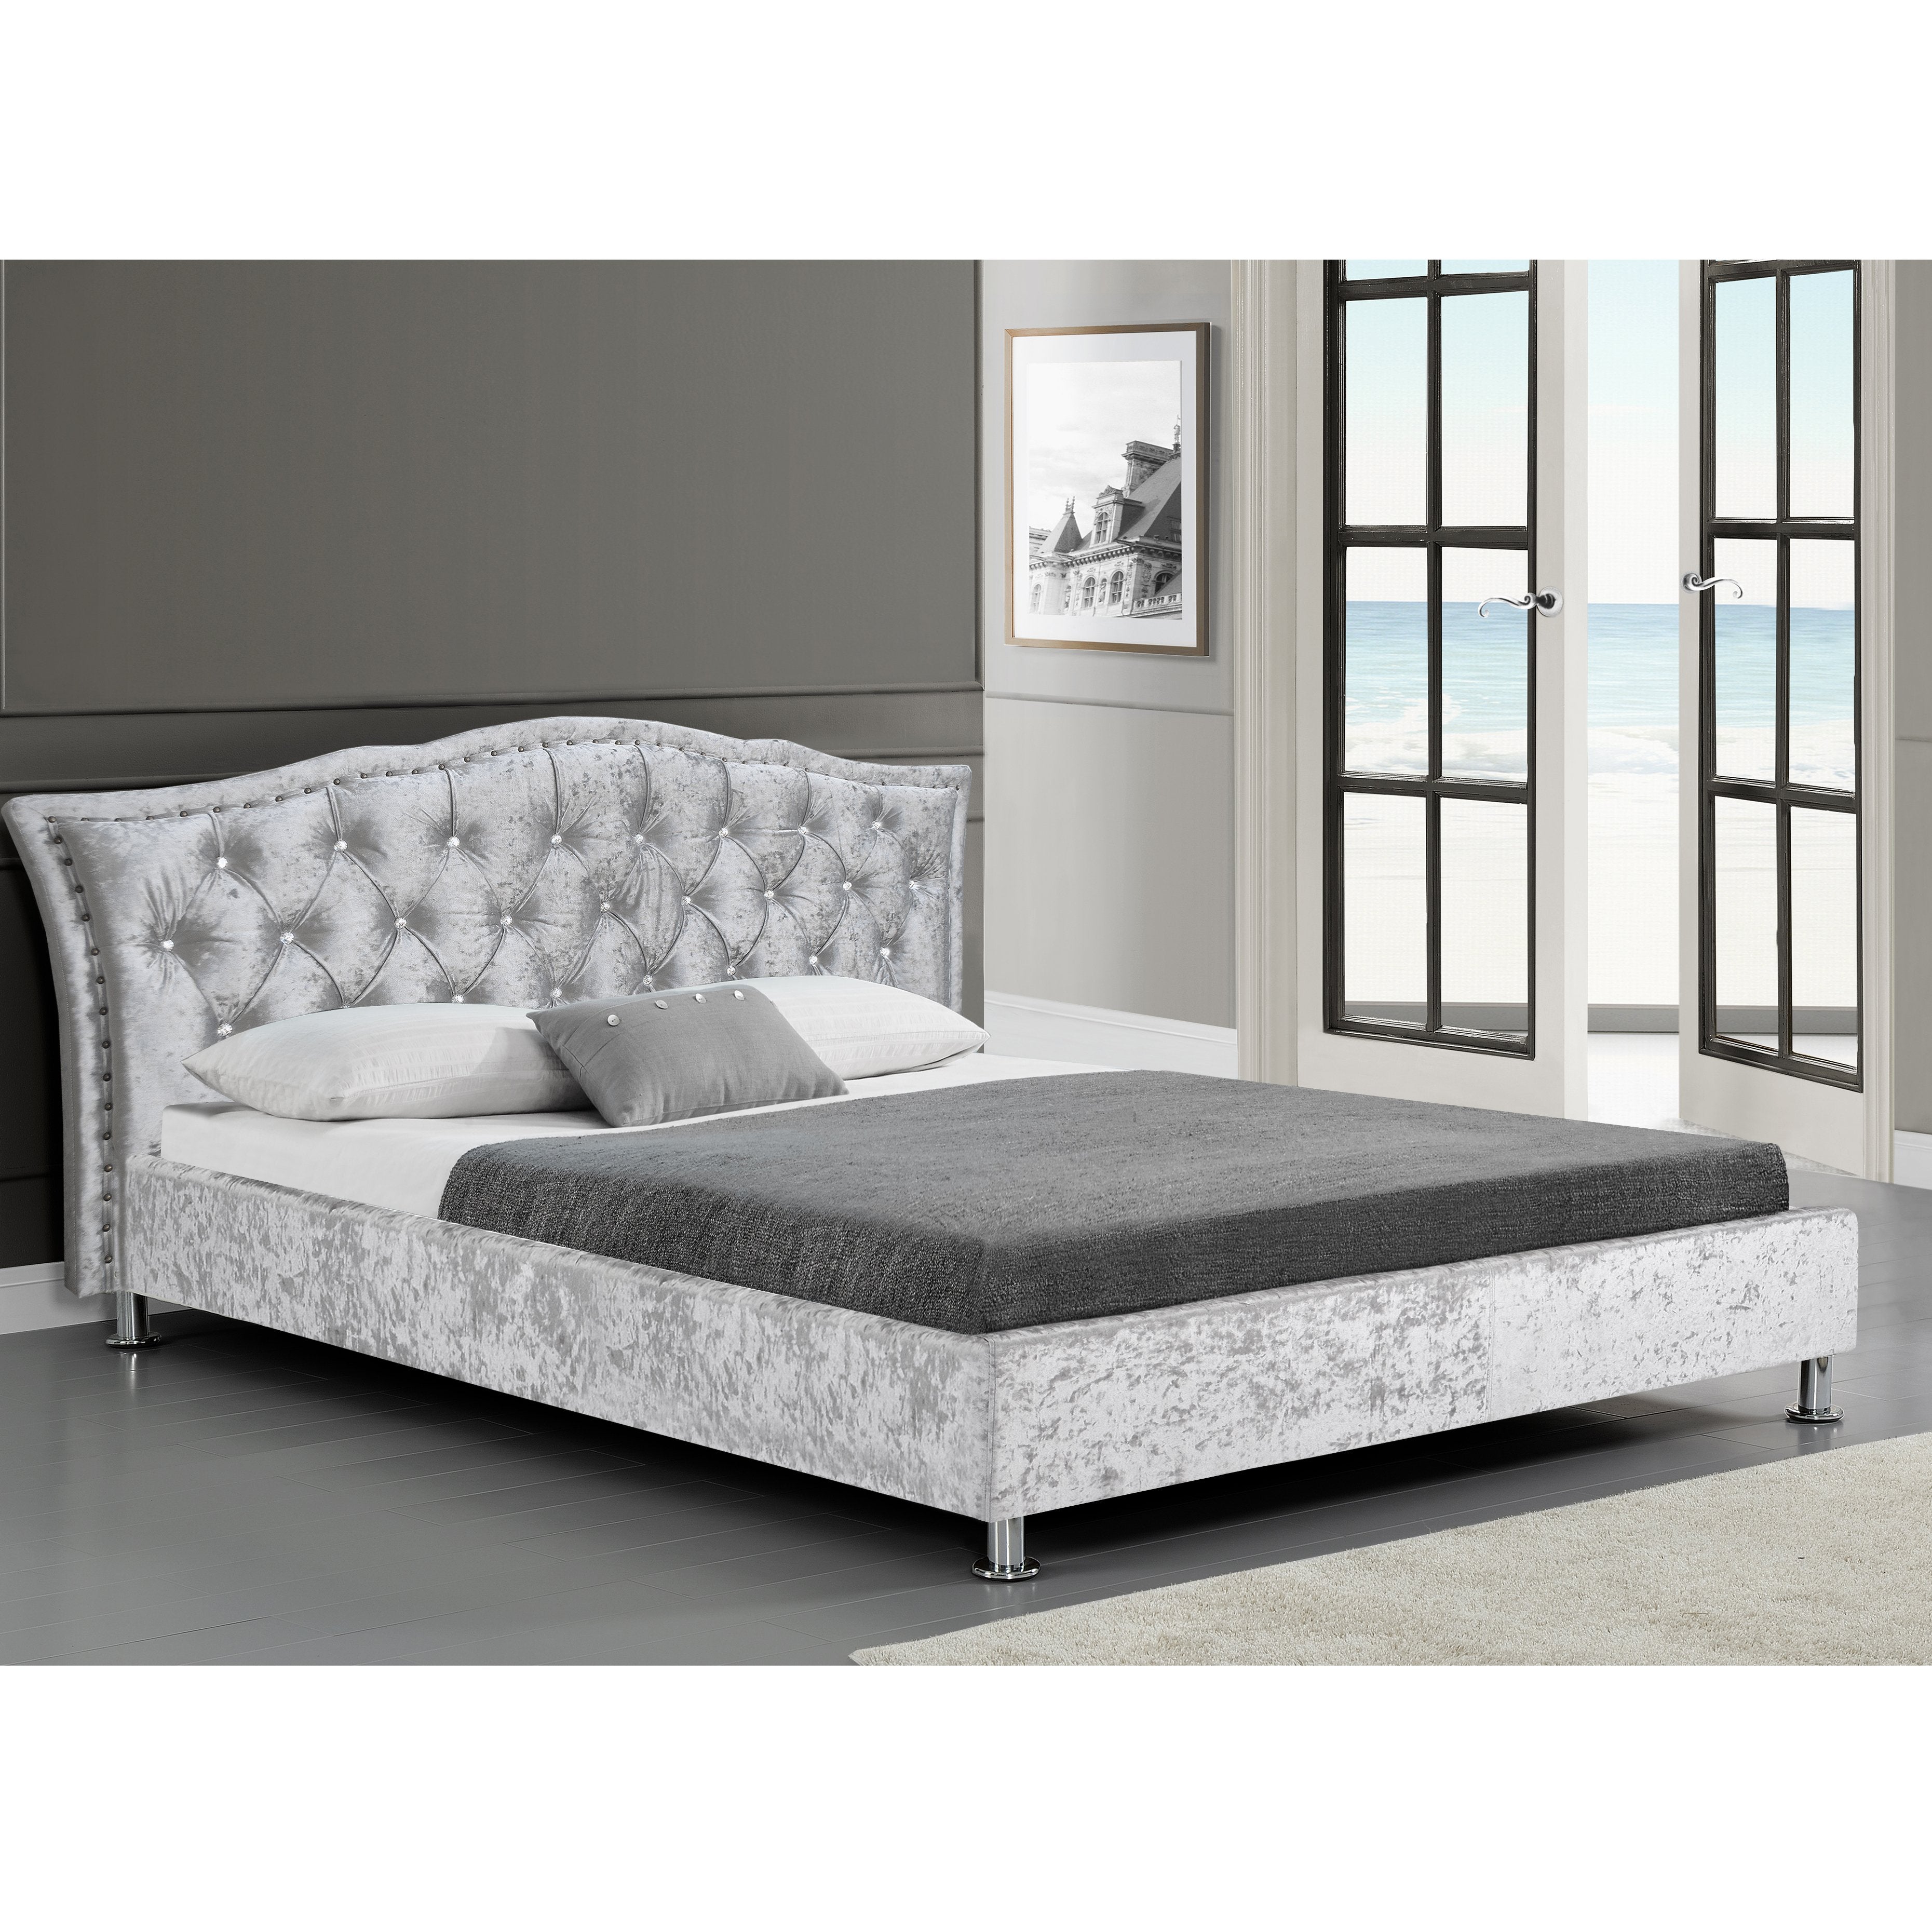 AMARI Silve Crushed Velvet Bed Frame with Tufted Diamante Headboard